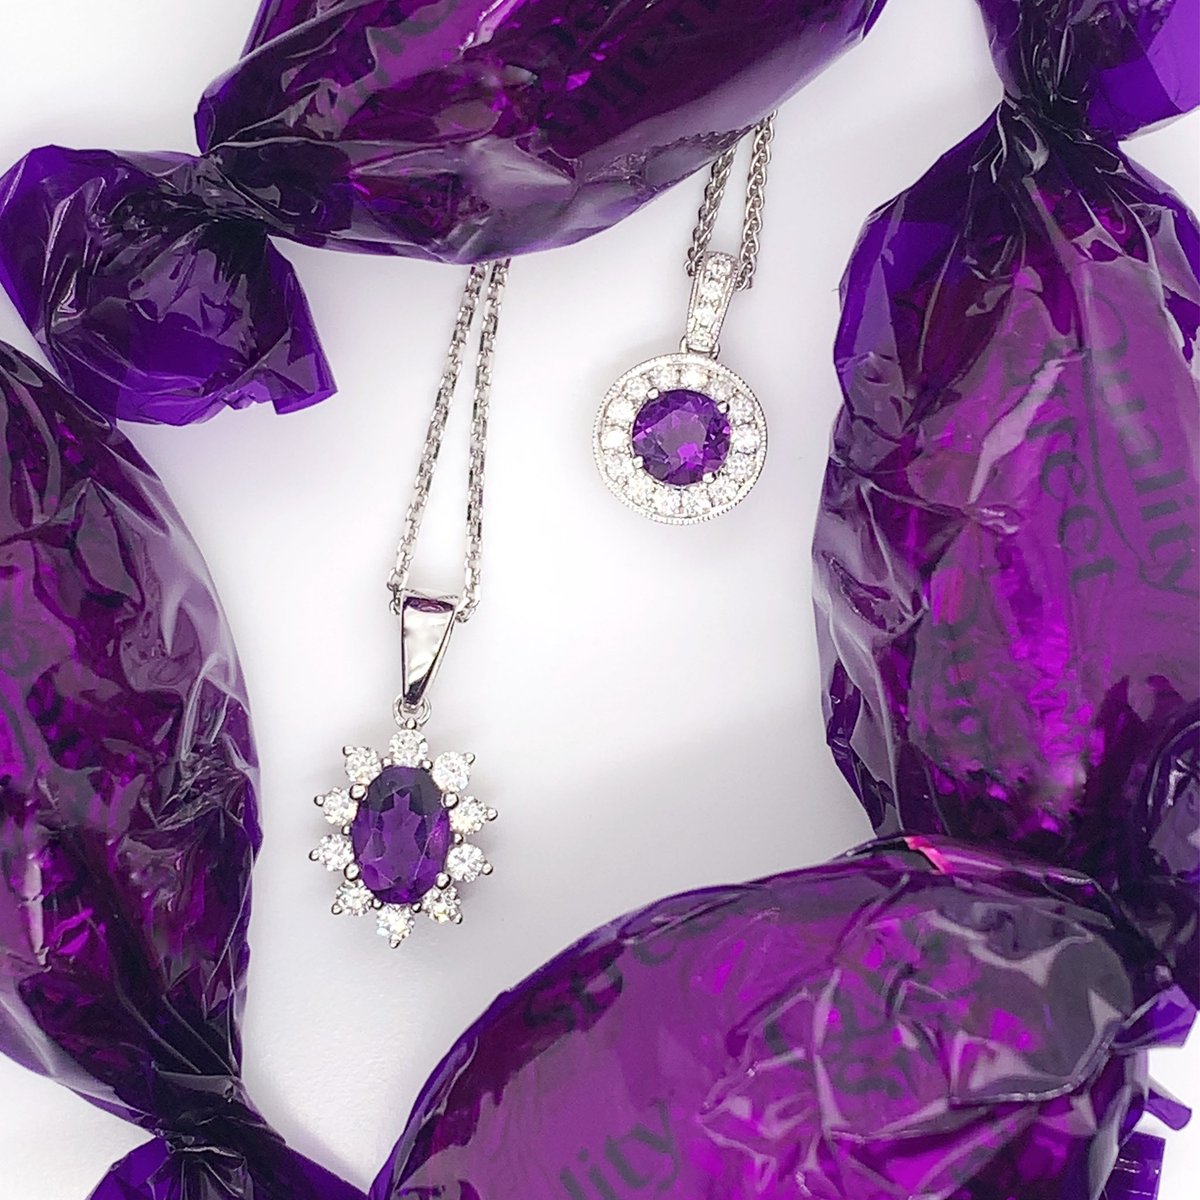 #Amethyst is the #birthstone for February, set here with #diamonds in #18ct #whitegold. #guildford #surrey #finejewellery #jewellery #jeweller 
#loveguildford #diamond #purple #violet #diamondjewellery #February #birthstone #februarybirthstone #pendant #amethystpendant